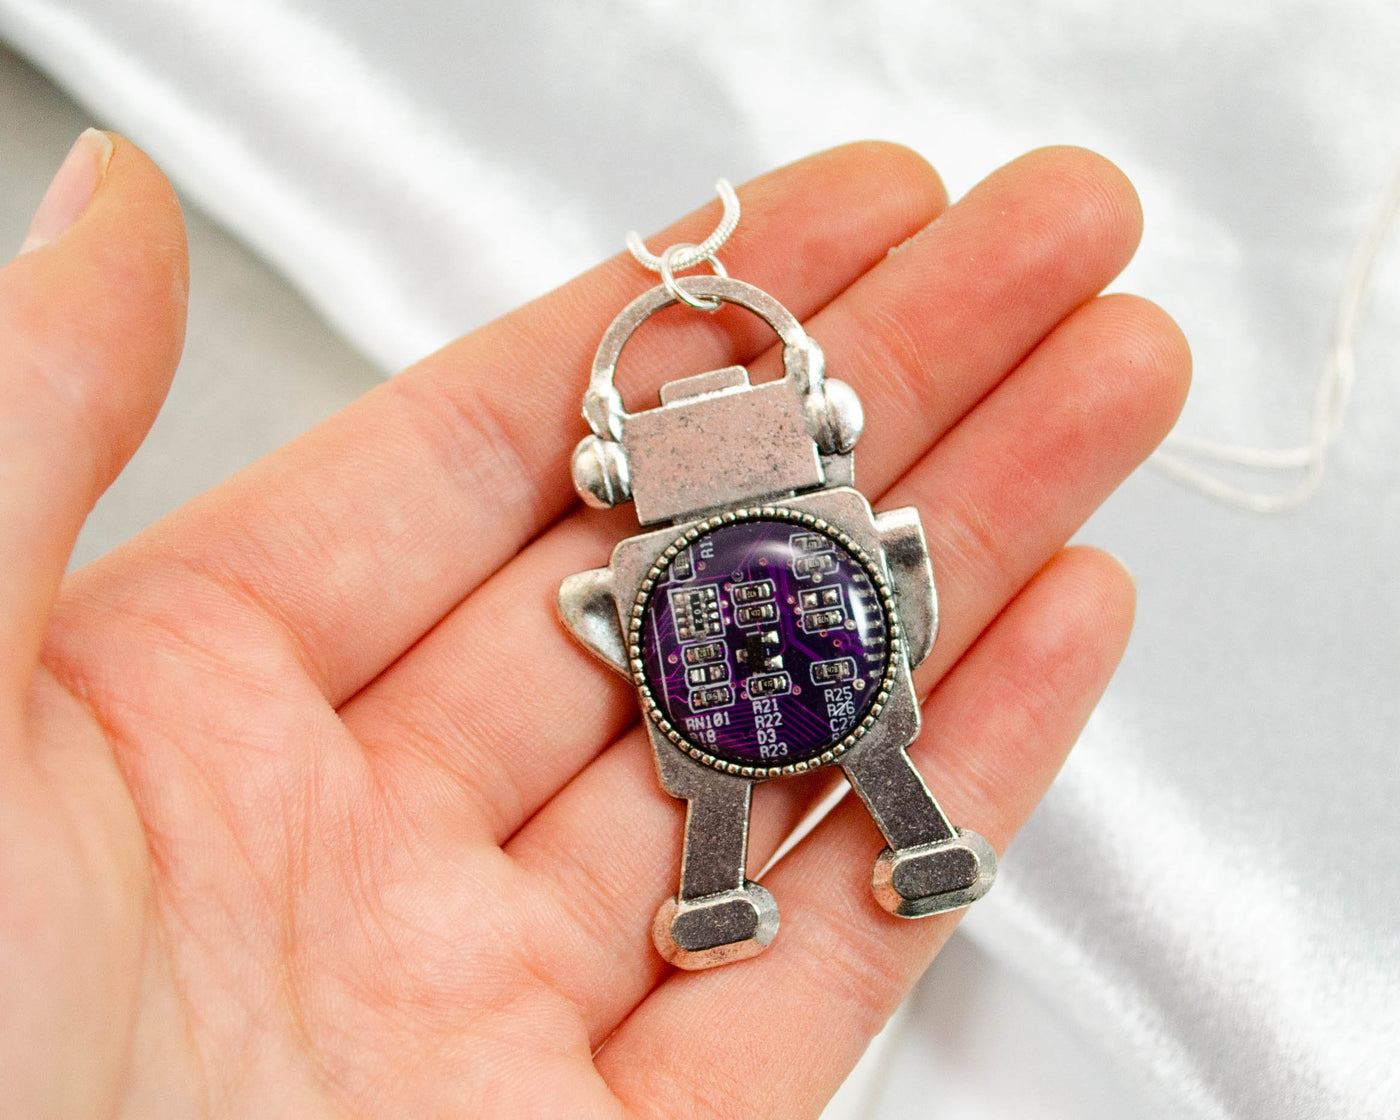 Violet Circuit Board Robot Necklace, Robotics Jewelry, Robot Engineering Gift, Cyber Punk Gift